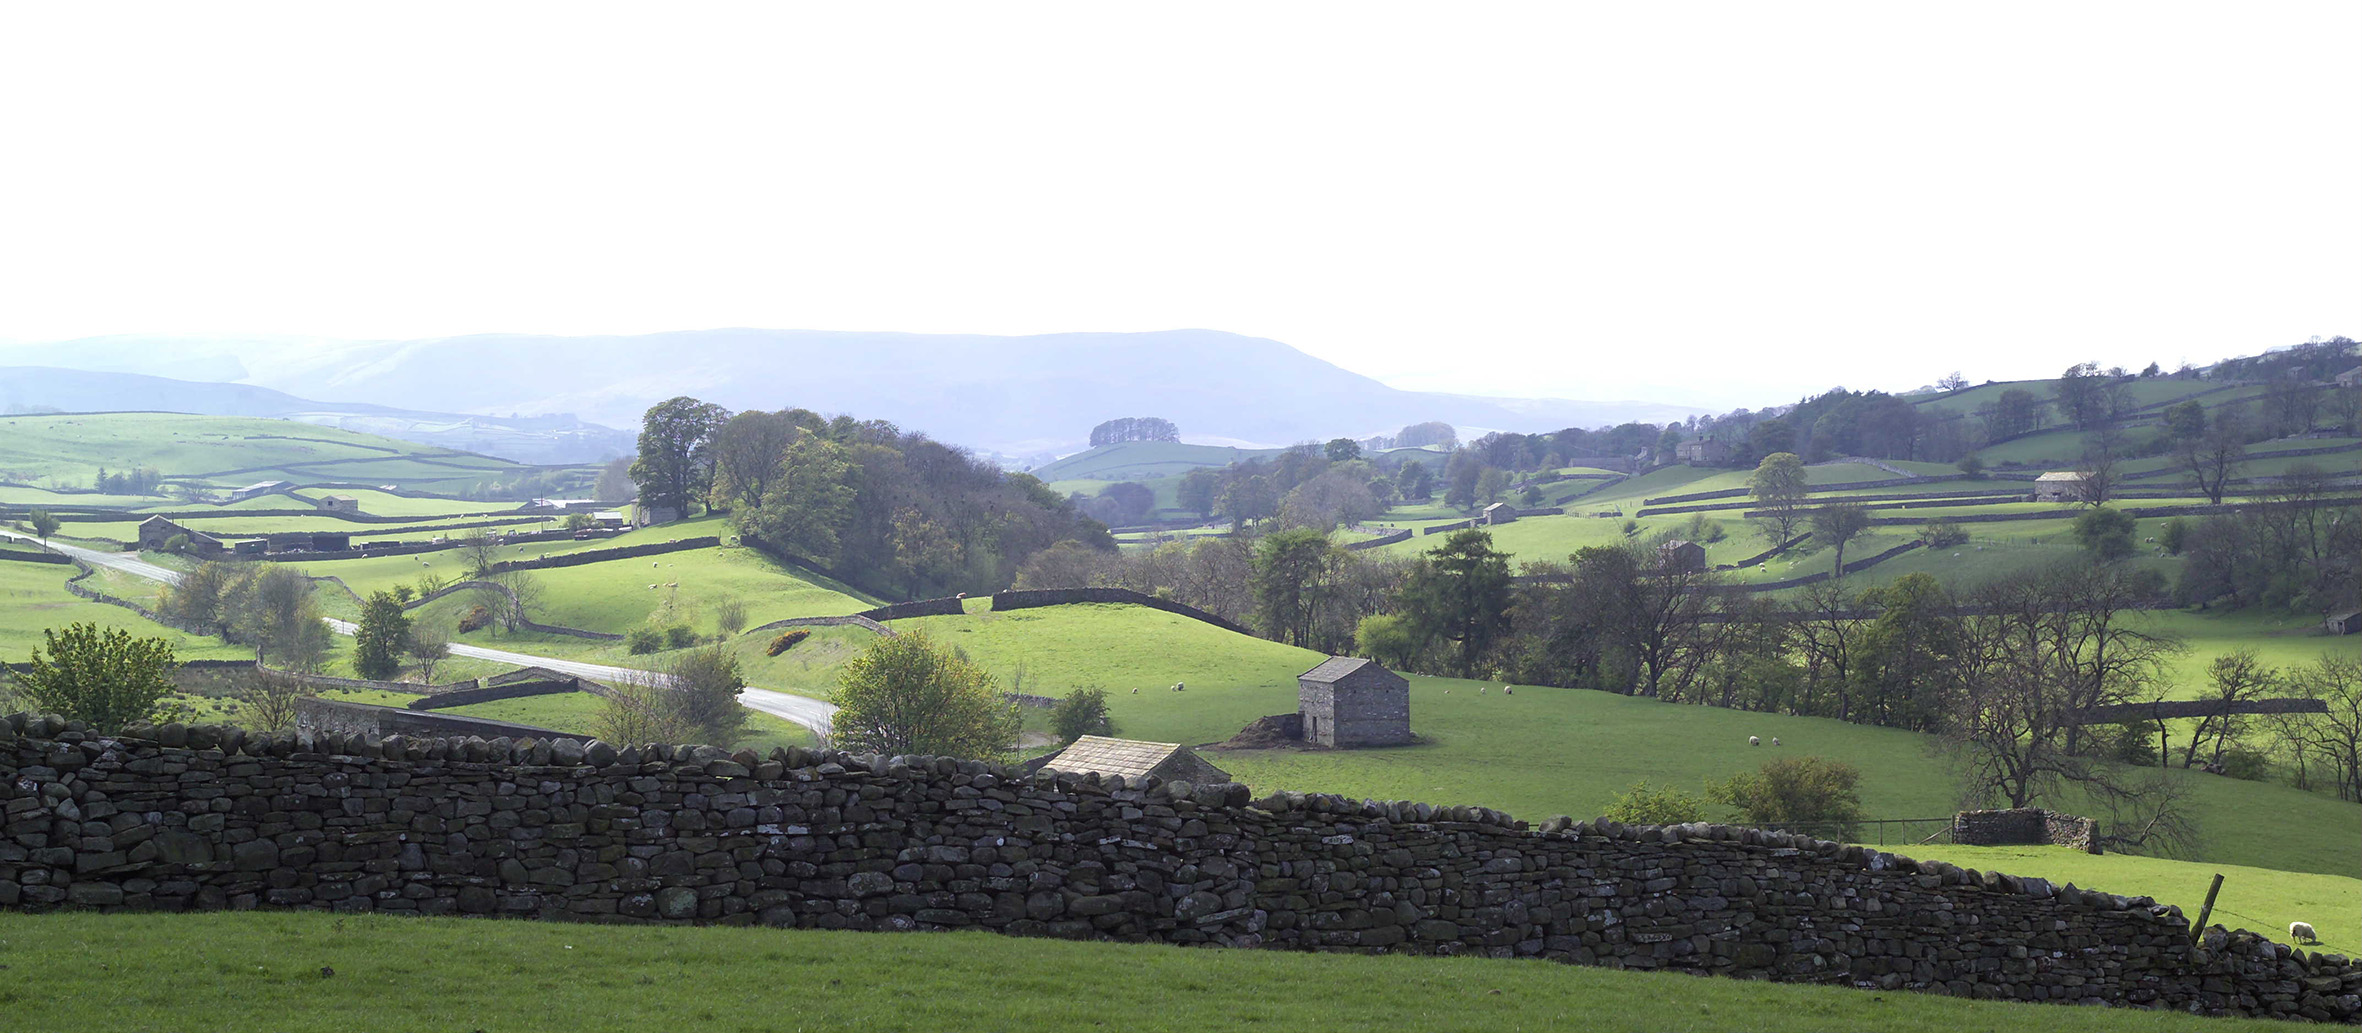 A scenic shot of the Yorkshire Dales.